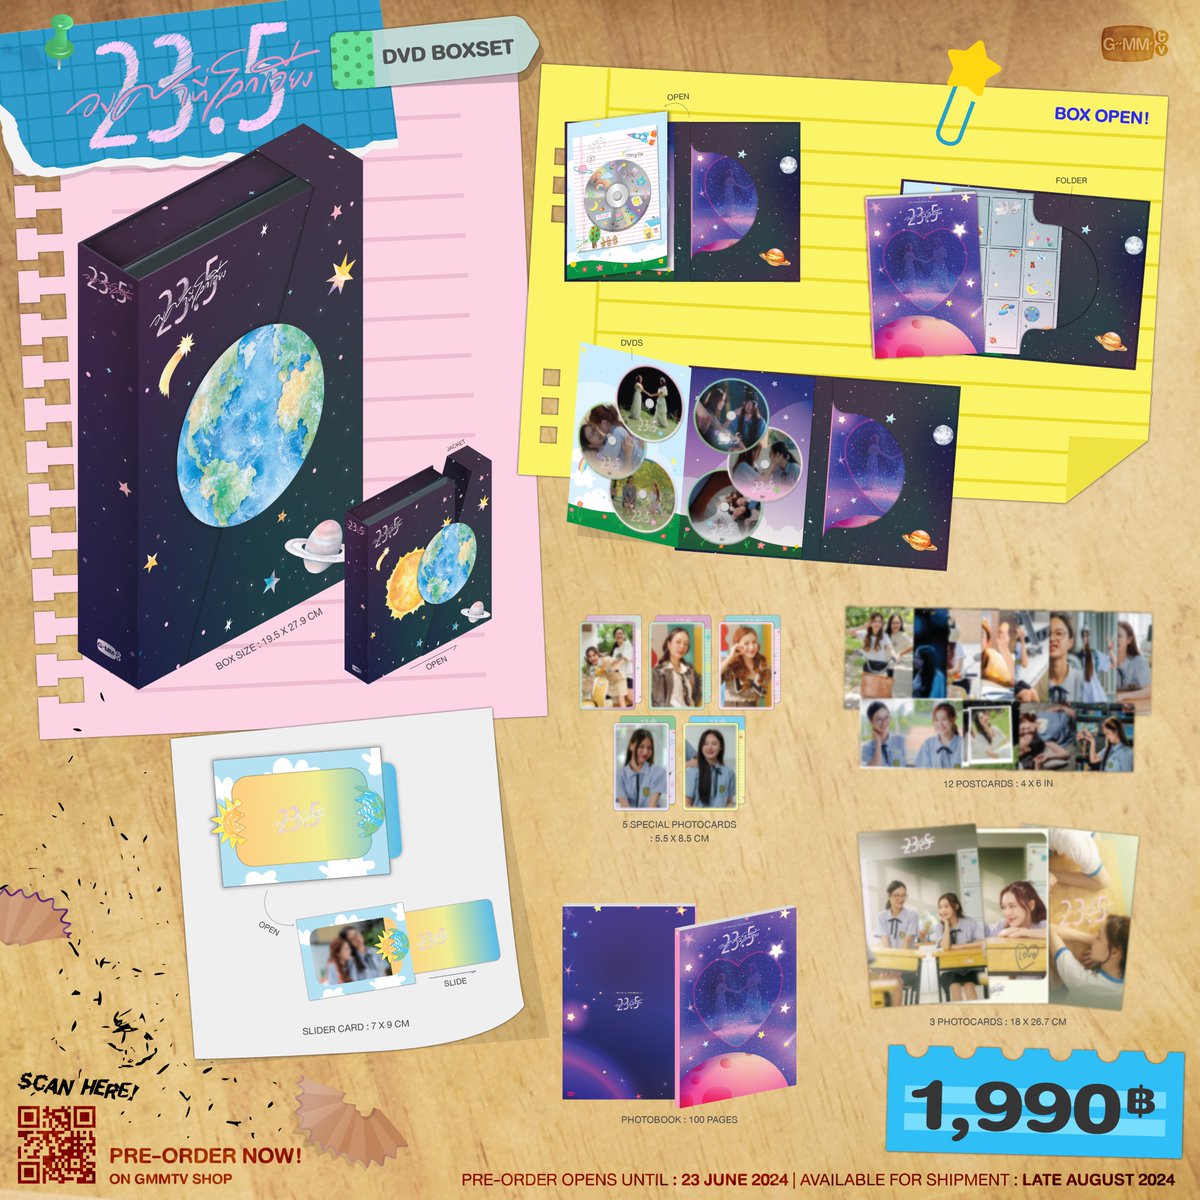 PRE-ORDER NOW DVD BOXSET 23.5 องศาที่โลกเอียง ON GMMTV SHOP gmm-tv.com/shop/dvd-boxse… Pre-order opens now until June 23, 2024. All purchase orders will be shipped sequentially starting from early August 2024. #23point5FinalEP #GMMTV